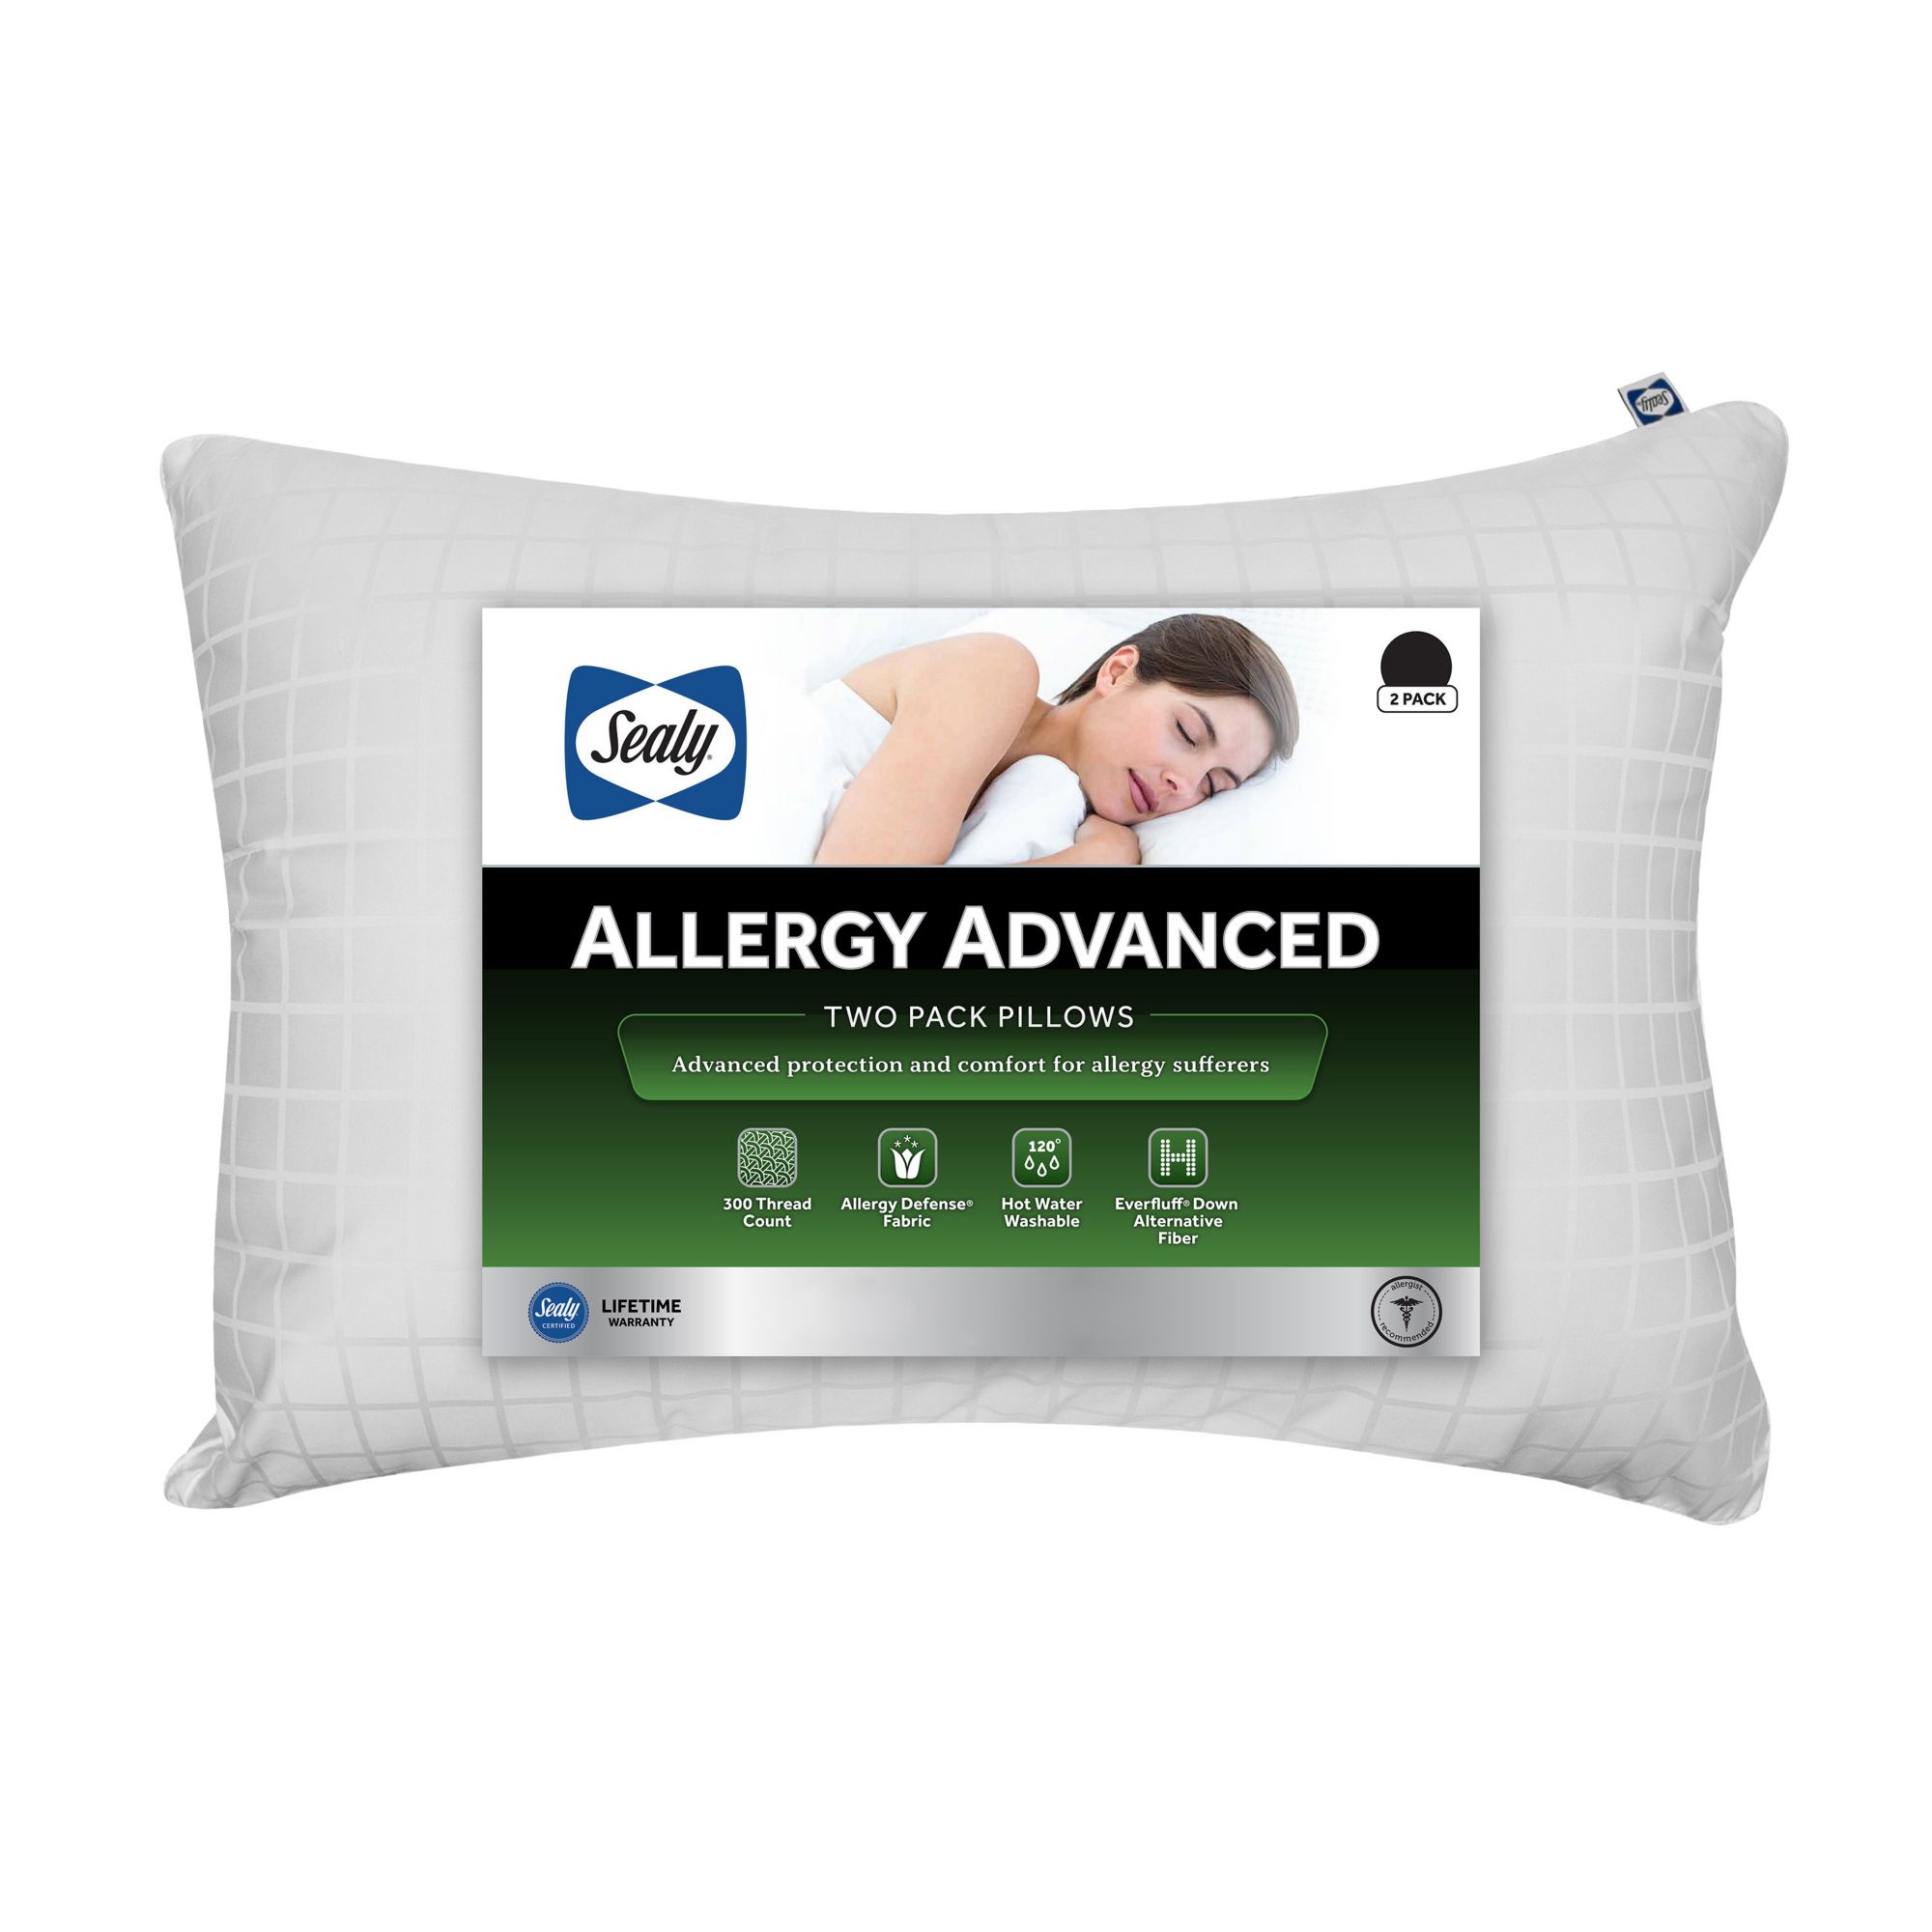 Sealy Allergy Advanced Standard Size Pillows | BJ's Wholesale Club